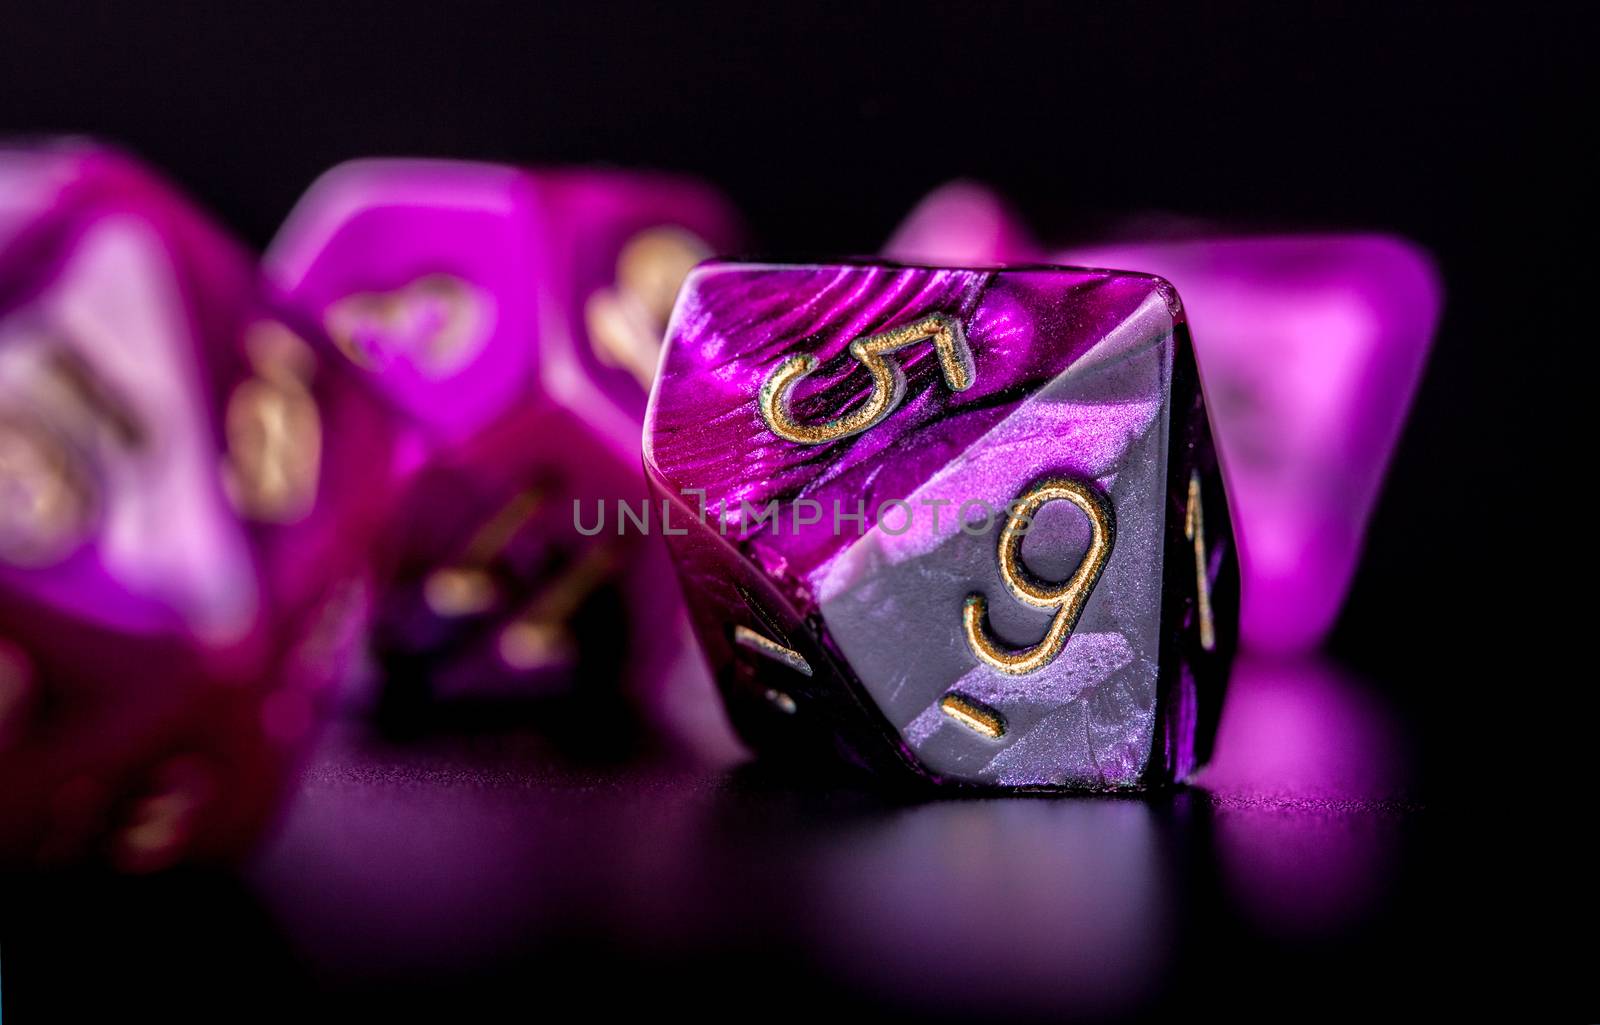 Set of dice for role playing games by lanalanglois